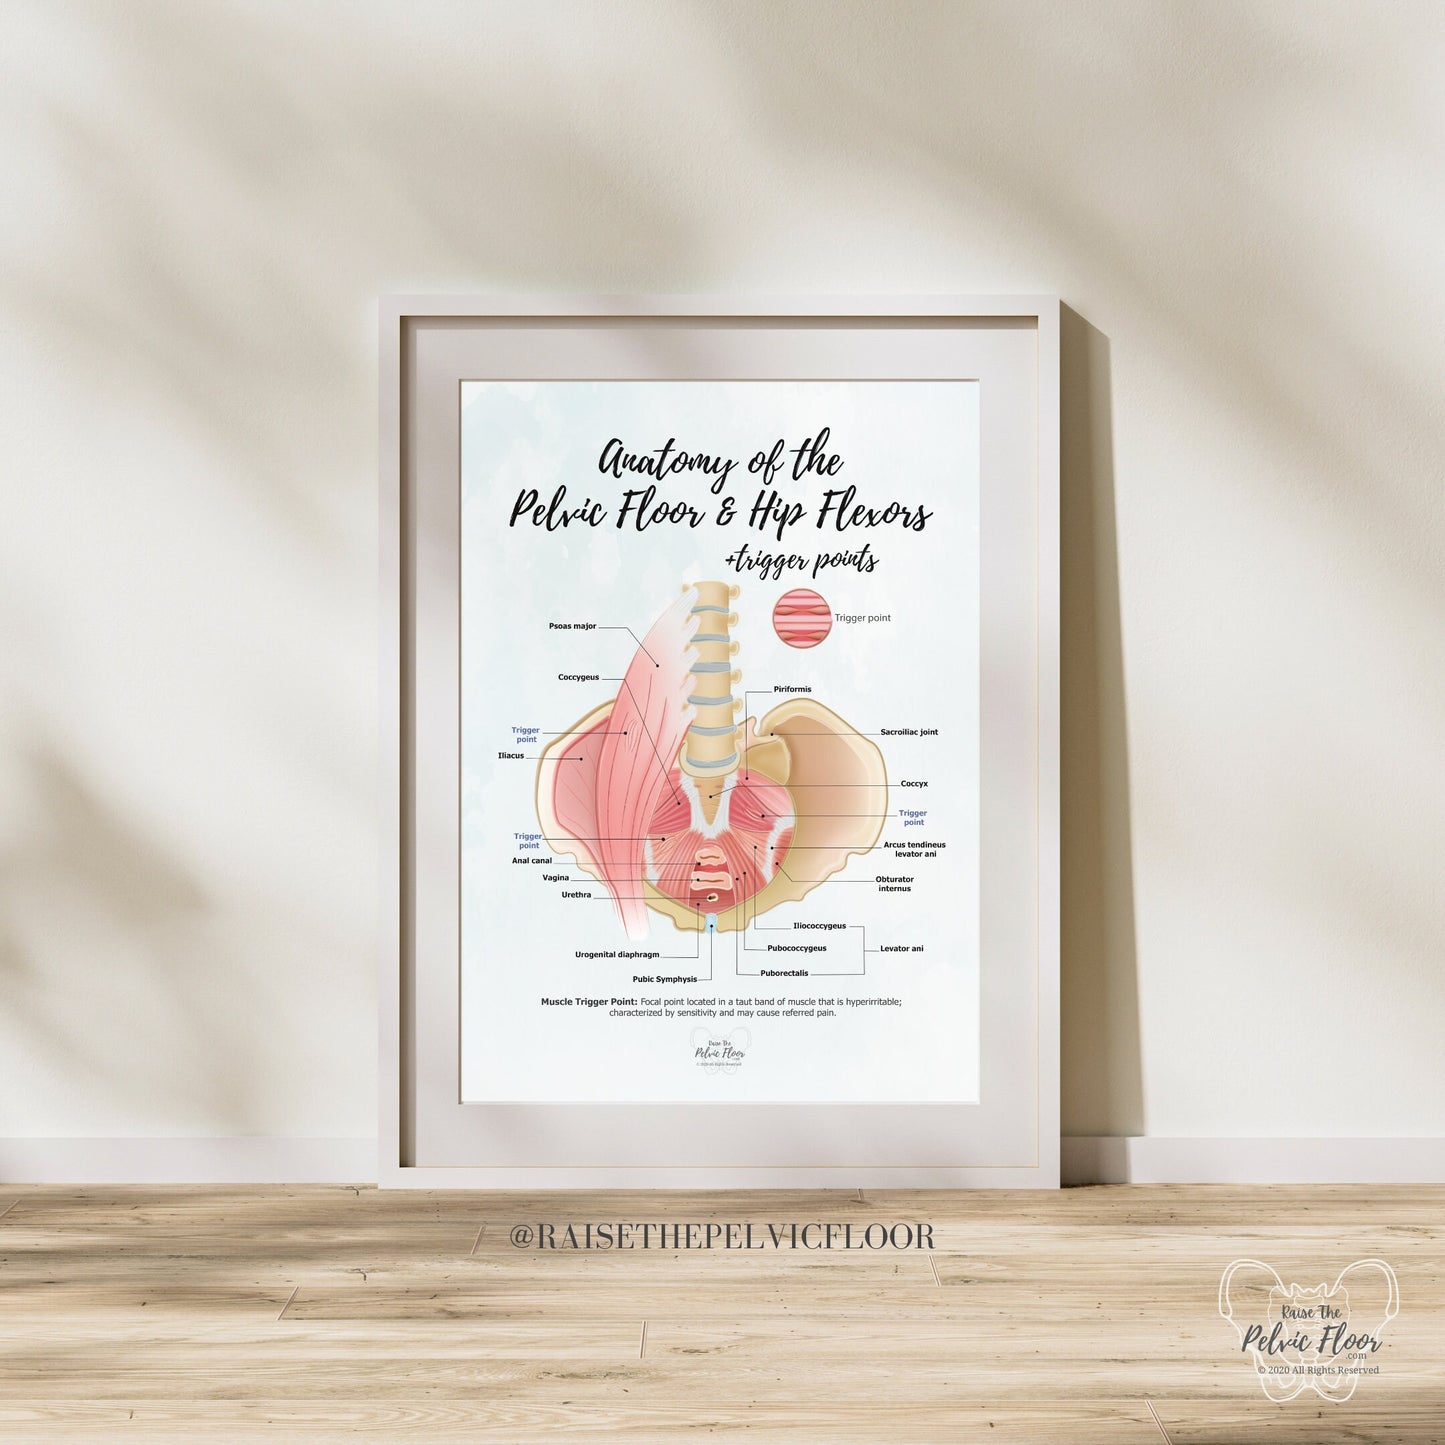 Anatomy of the Pelvic Floor and Hip Flexors + Trigger Points | Poster Art